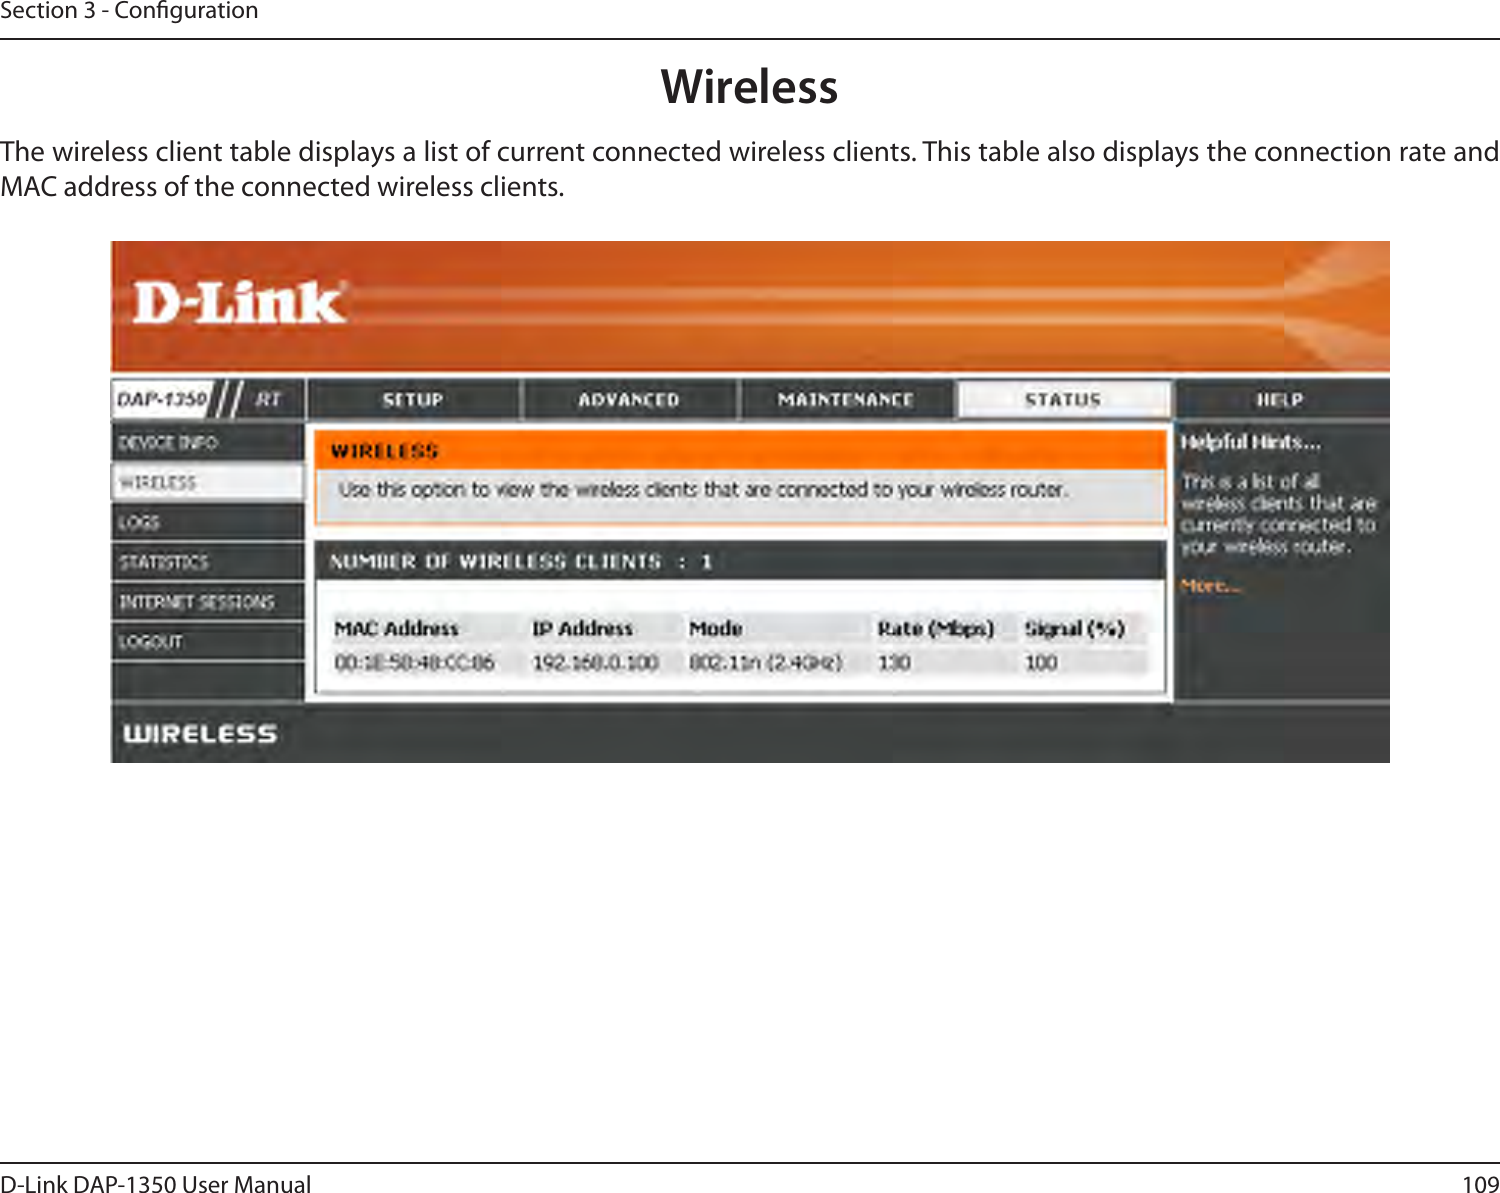 109D-Link DAP-1350 User ManualSection 3 - CongurationThe wireless client table displays a list of current connected wireless clients. This table also displays the connection rate and MAC address of the connected wireless clients.Wireless